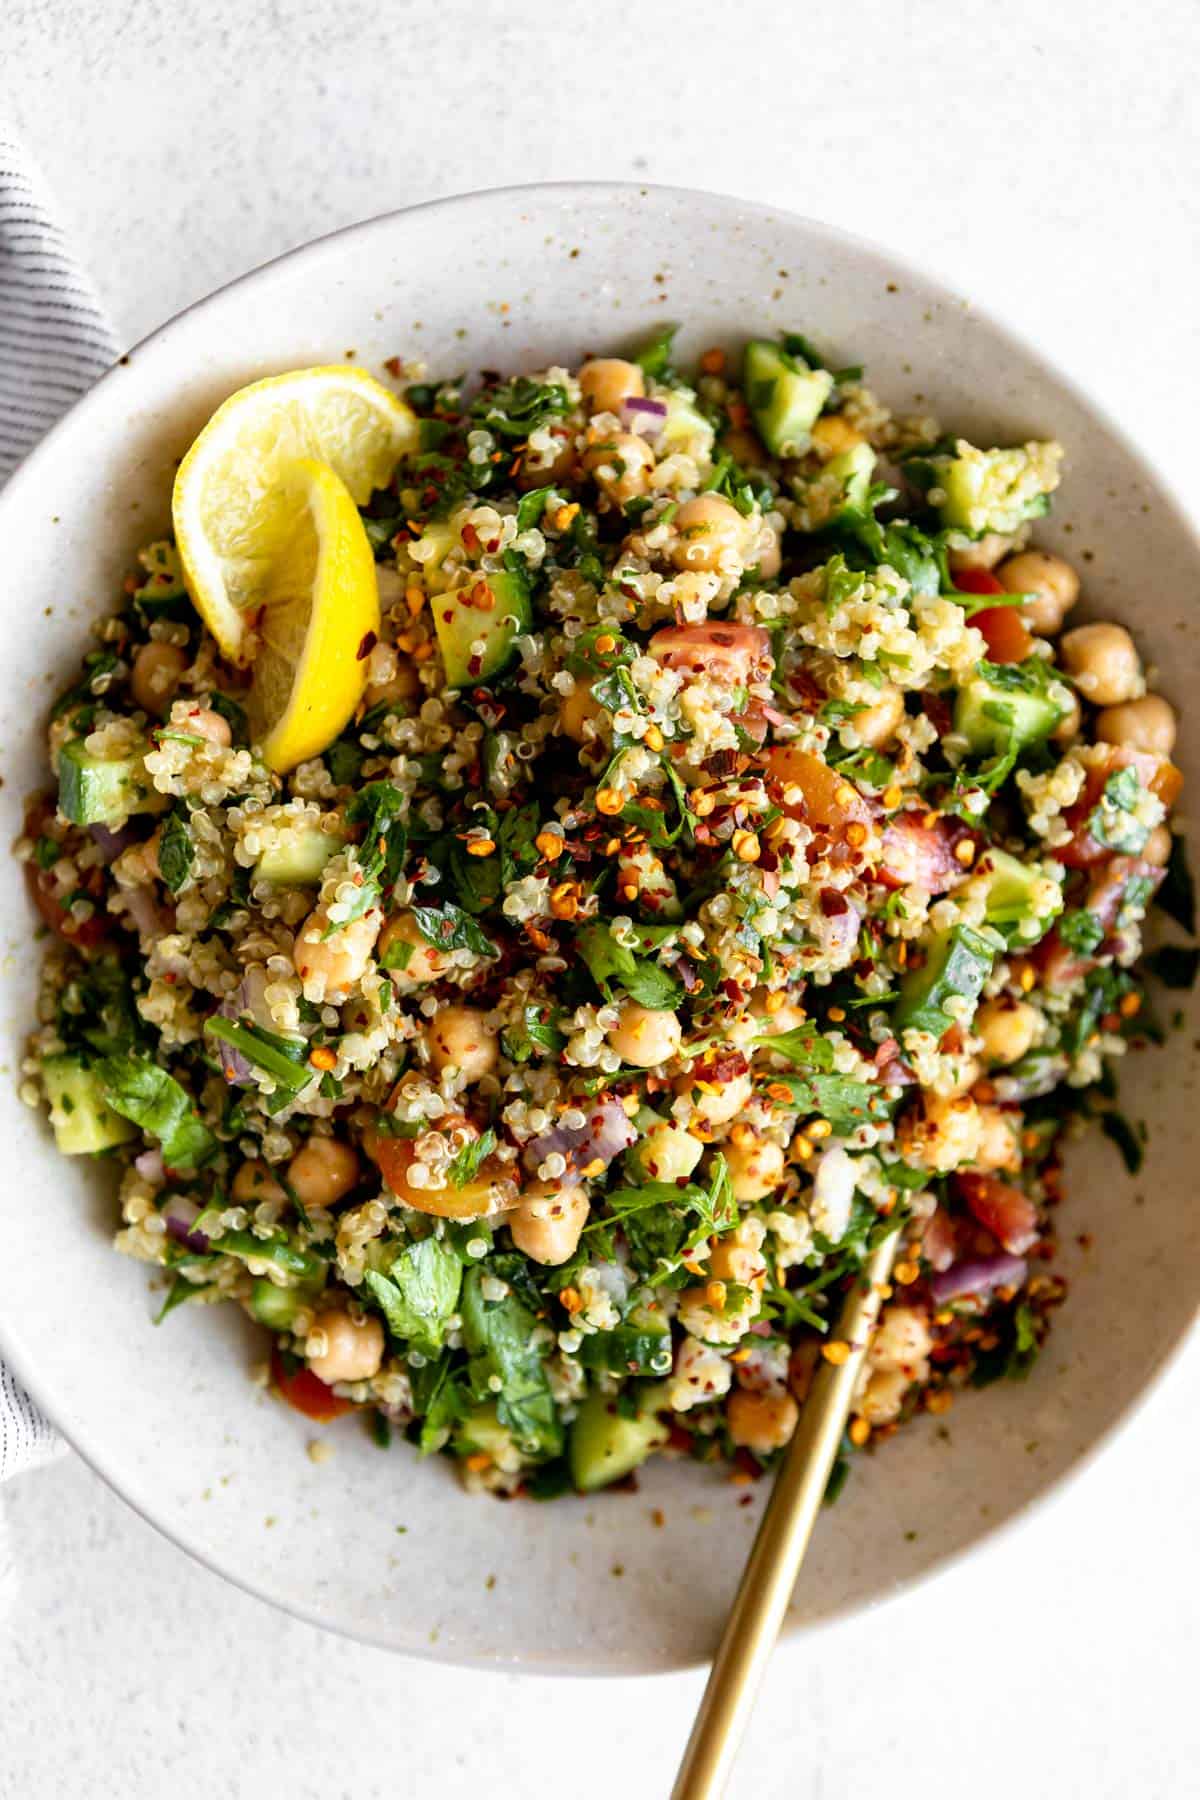 gluten free tabbouleh salad with chickpeas and lemon